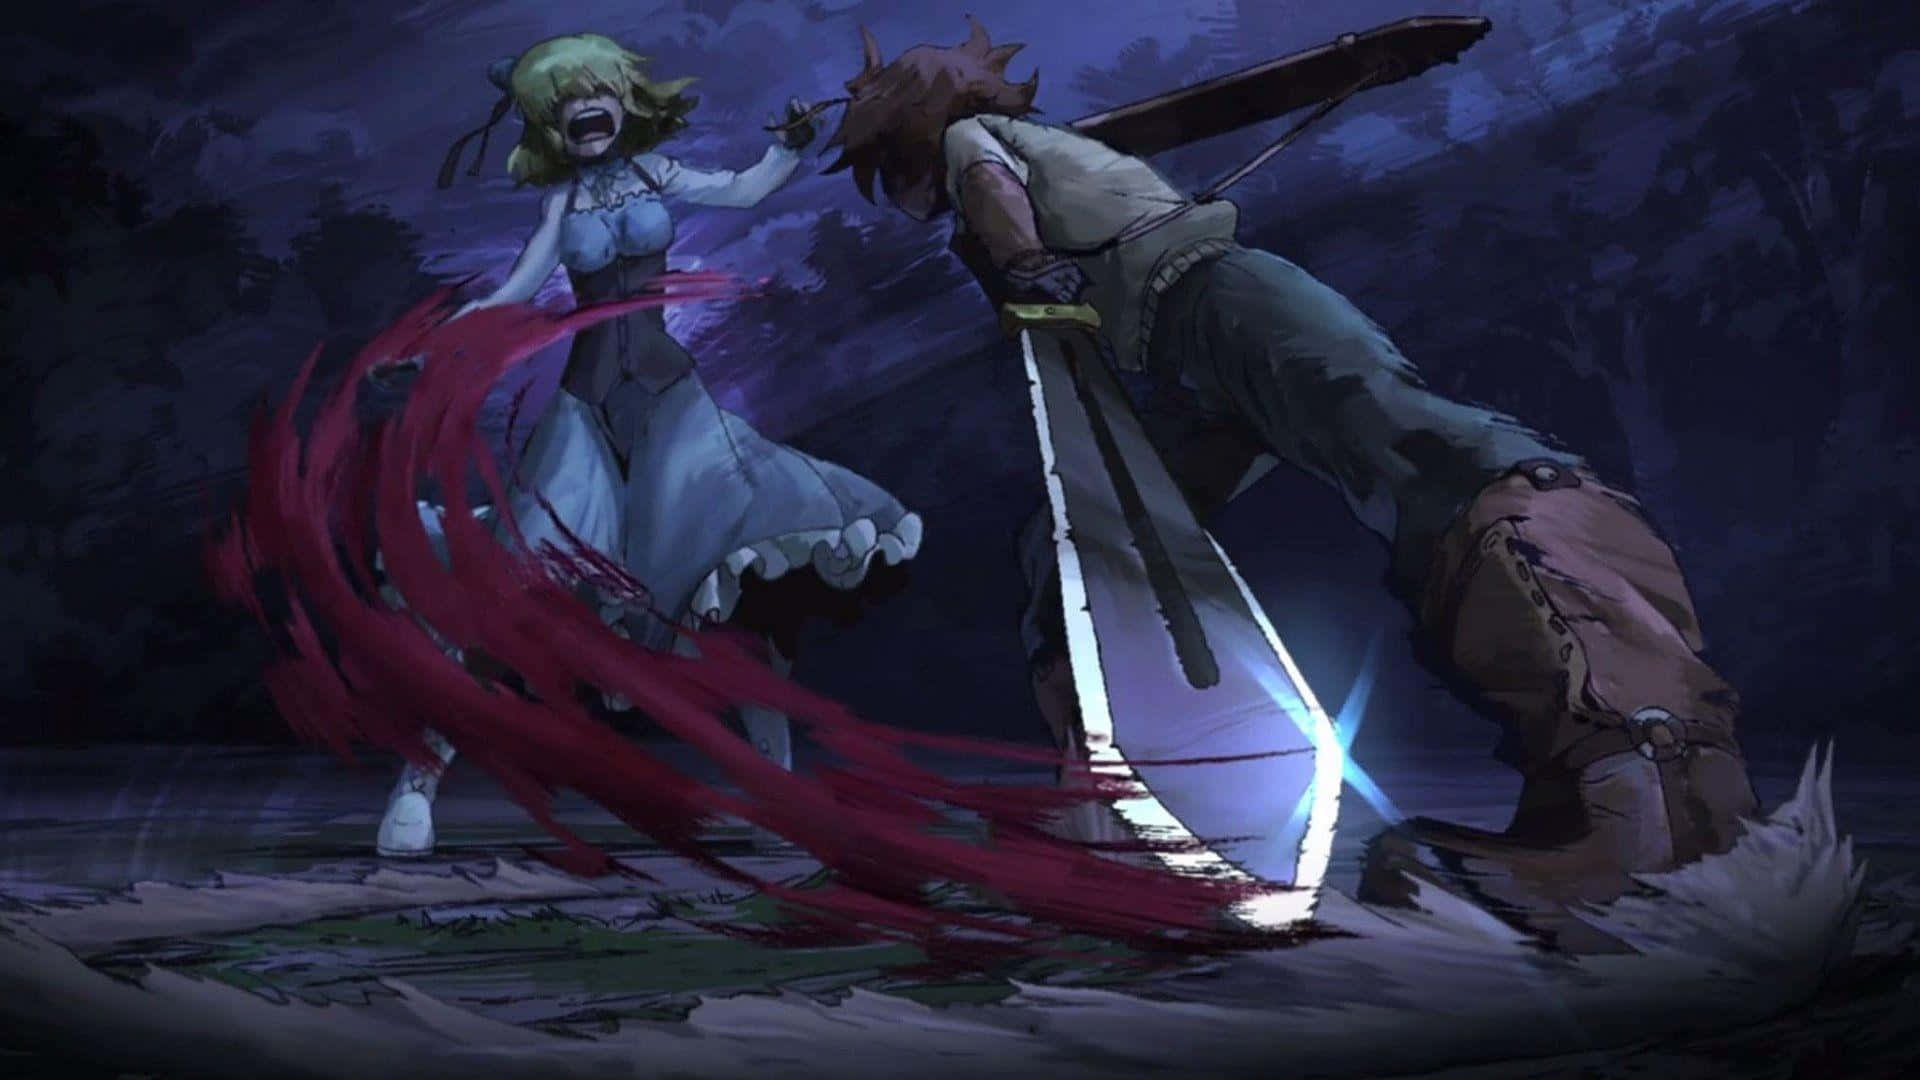 Fight for justice in the dark and chaotic world of the anime Akame Ga Kill.